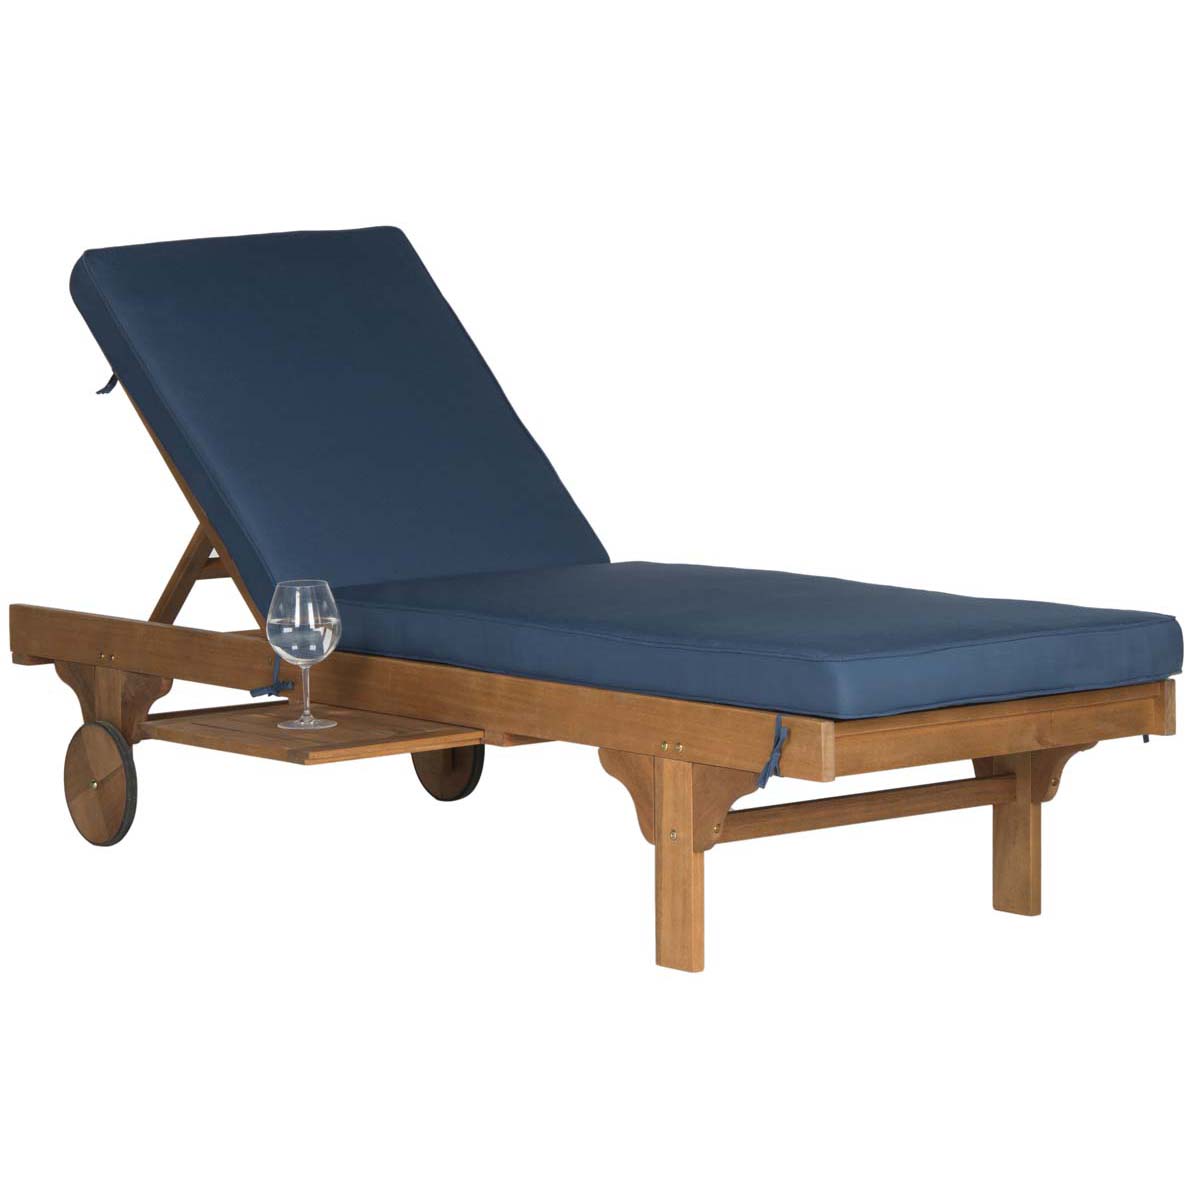 Safavieh Newport Chaise Lounge Chair With Side Table , PAT7022 - Natural/Navy